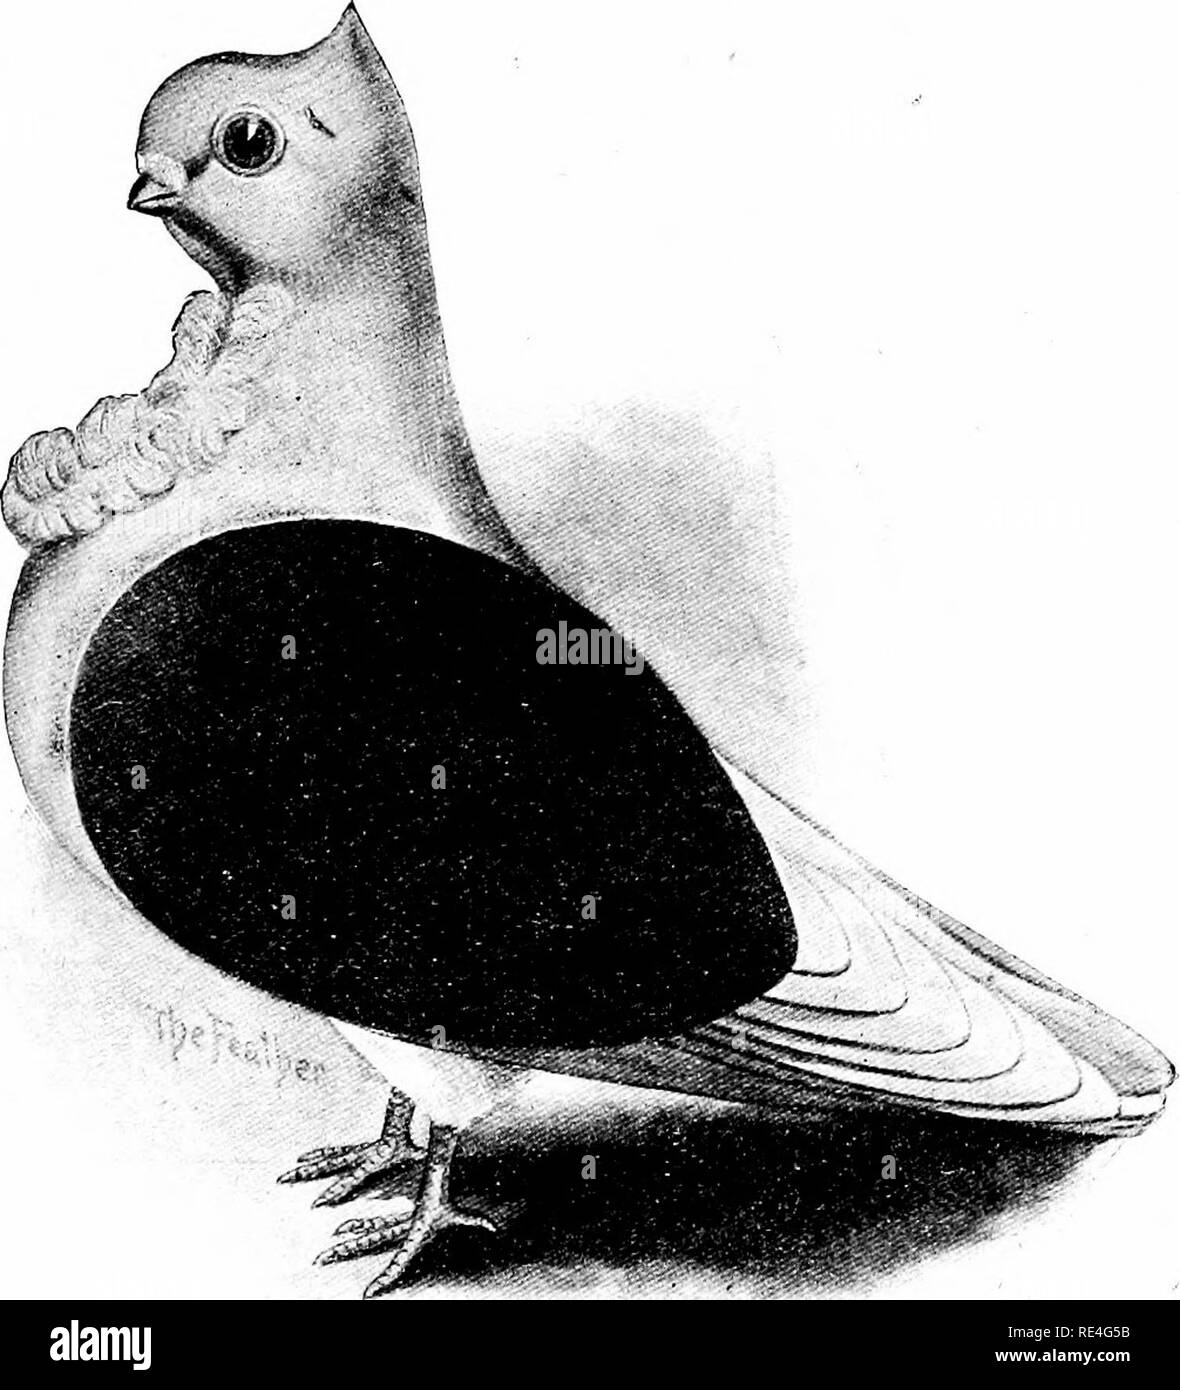 . The Feather's practical pigeon book. Pigeons. BLACK-WING TURBIT The number of breeders of Turbits is constantlj' on the increase, and certainly so beautiful a little bird de- serves numerous admirers. It should be as small as possible to be strong, round, and cobby, with broad chest; short legs and neck; tail and flights, carried well ofif the ground; round head; large, dark, hazel eyes; short and thick beak; prominent gullet, and long frill, opening from the center to right and left; color, white, excepting the shoulders which are black. 129. Please note that these images are extracted from Stock Photo